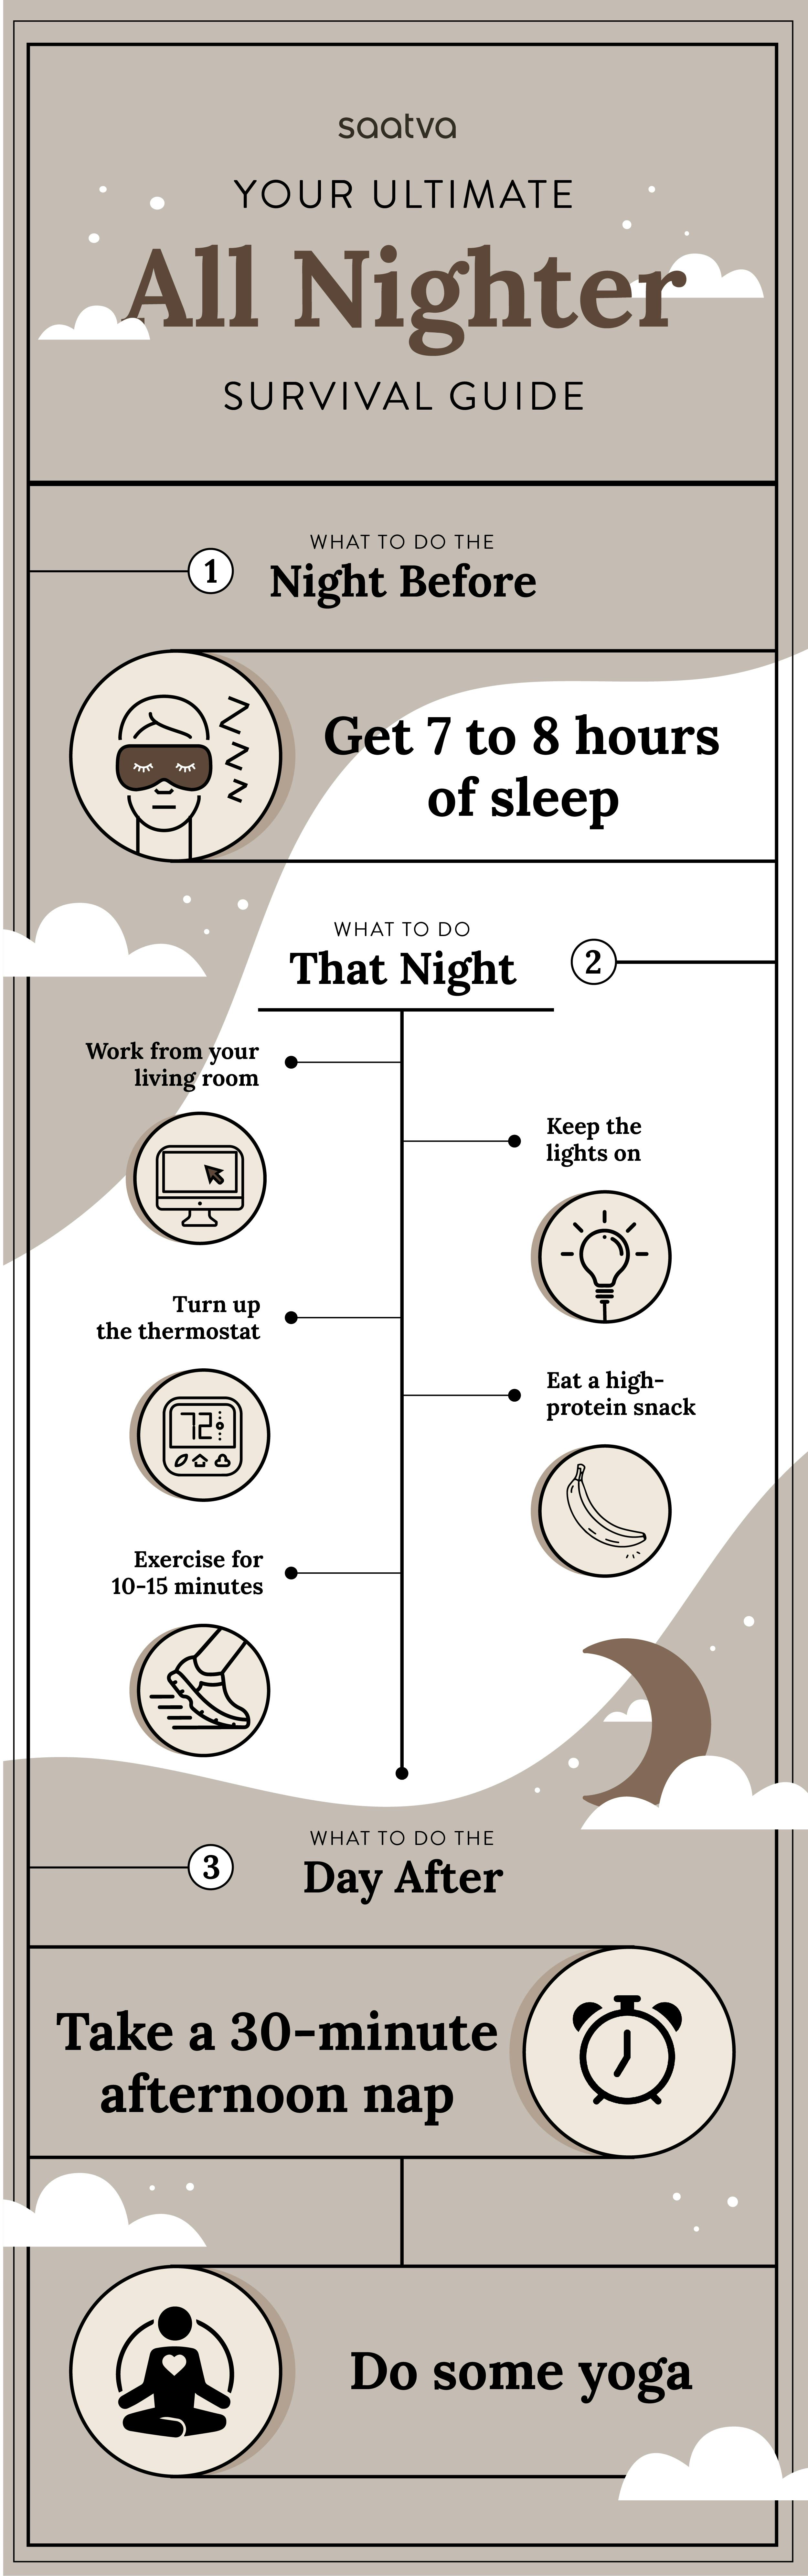 infographic survival guide featuring tips on how to stay awake